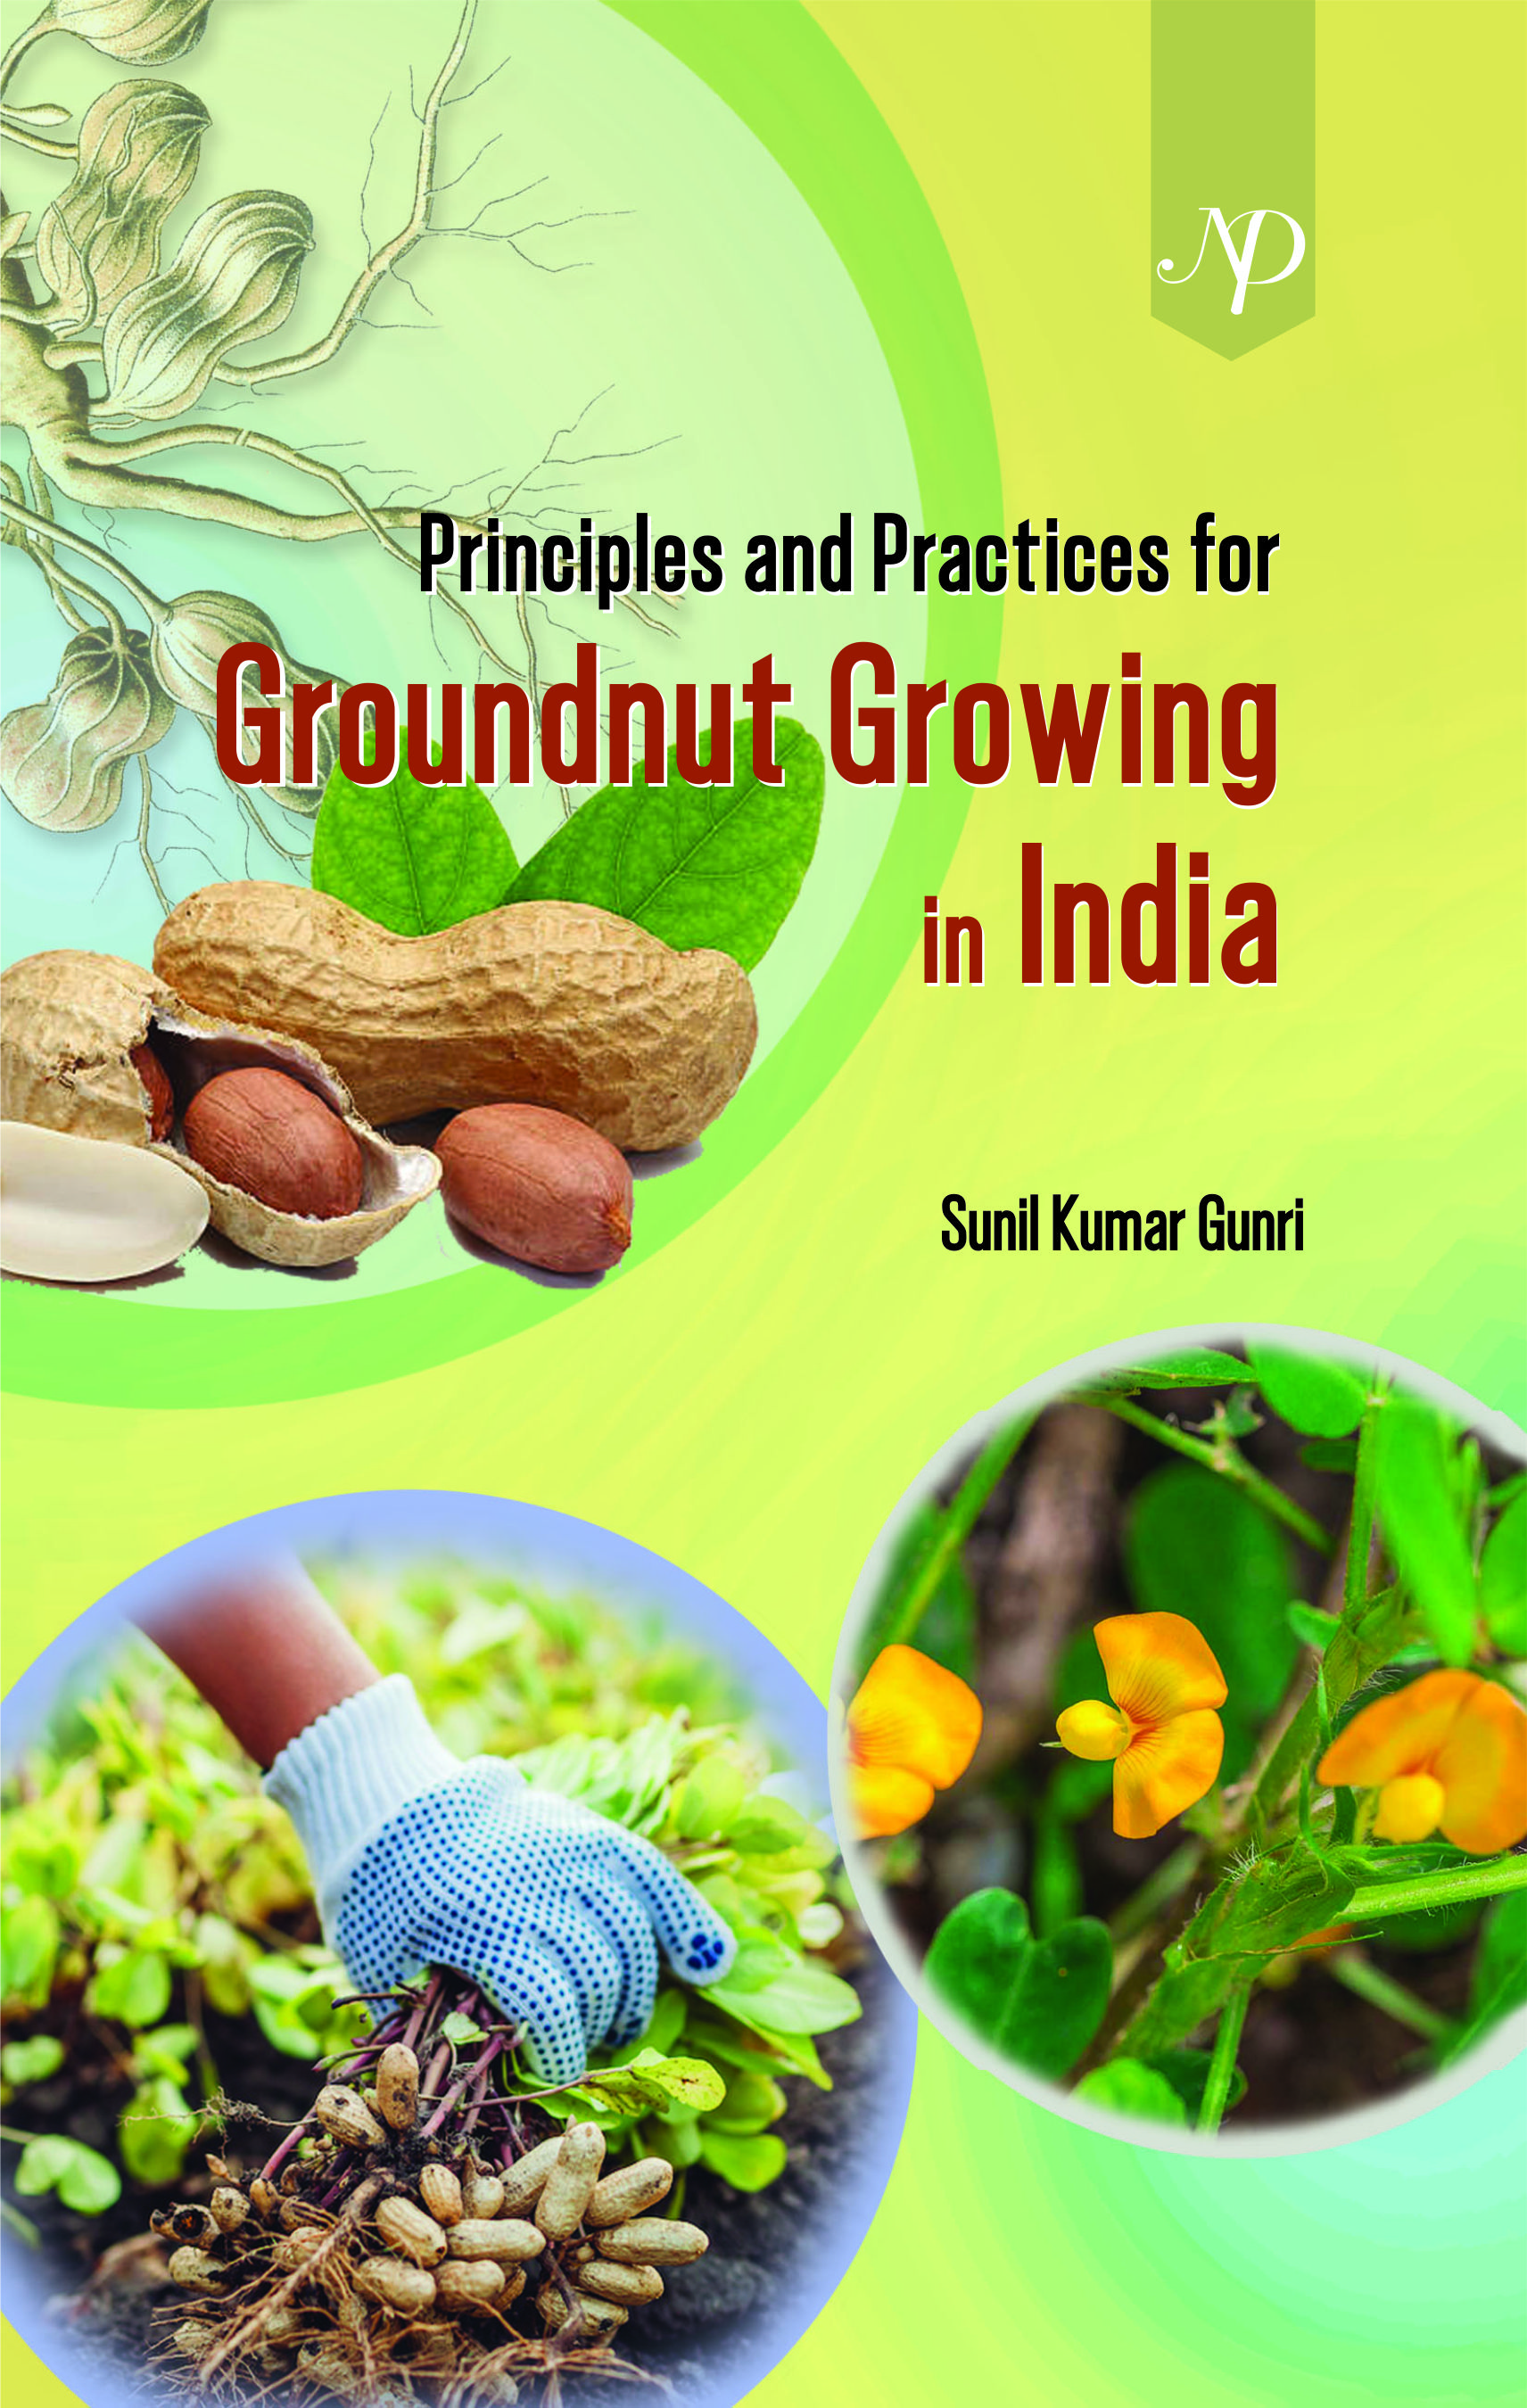 Principles and Practices for groundnut growing Cover.jpg